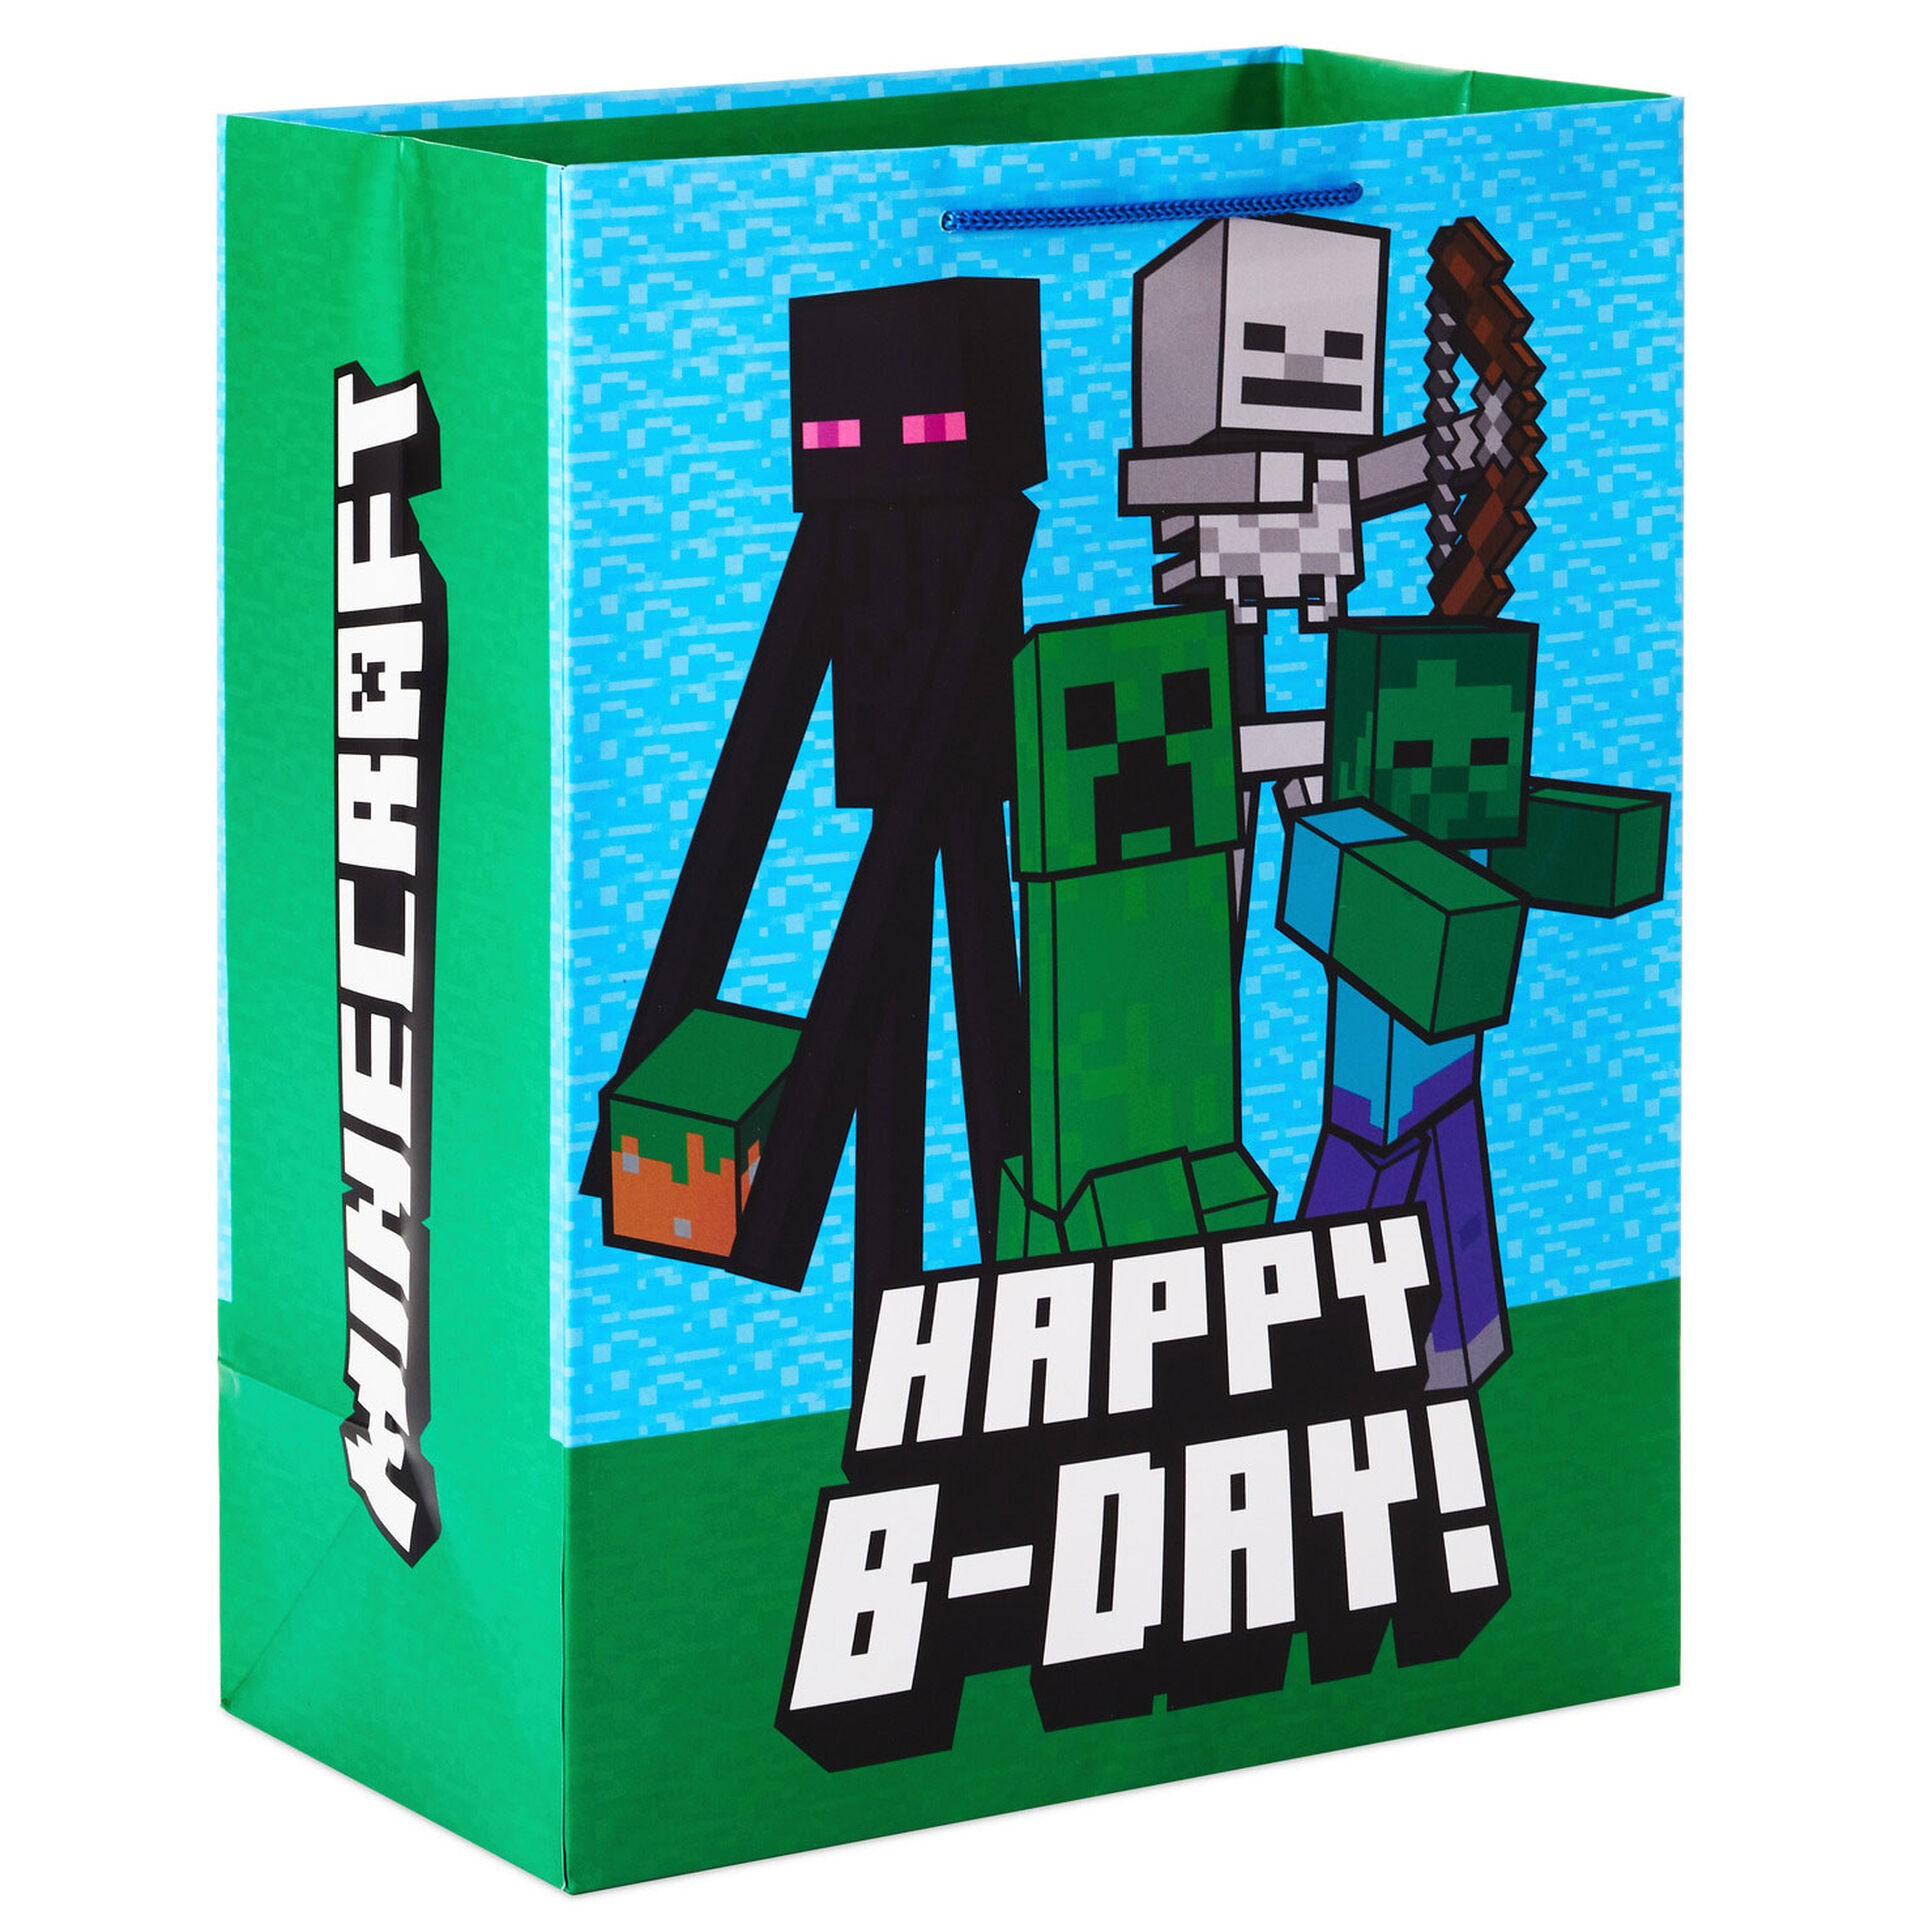 Diamond Gift Wrapping Paper For Craft And Gifts Inspired By Minecraft 3 x Sheets 